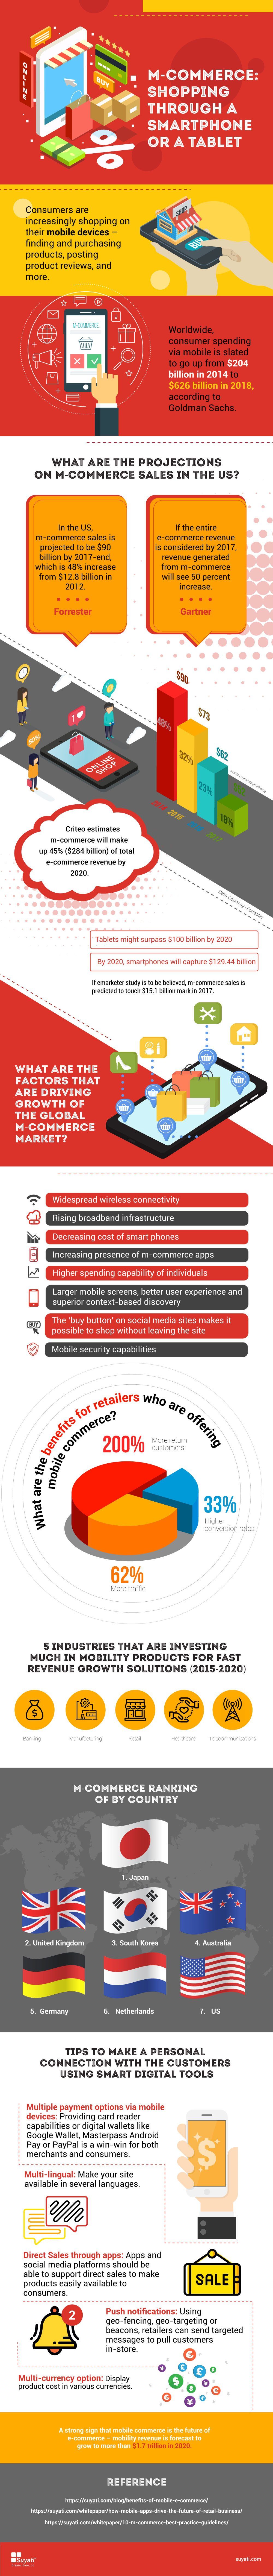 Mobile commerce infographic